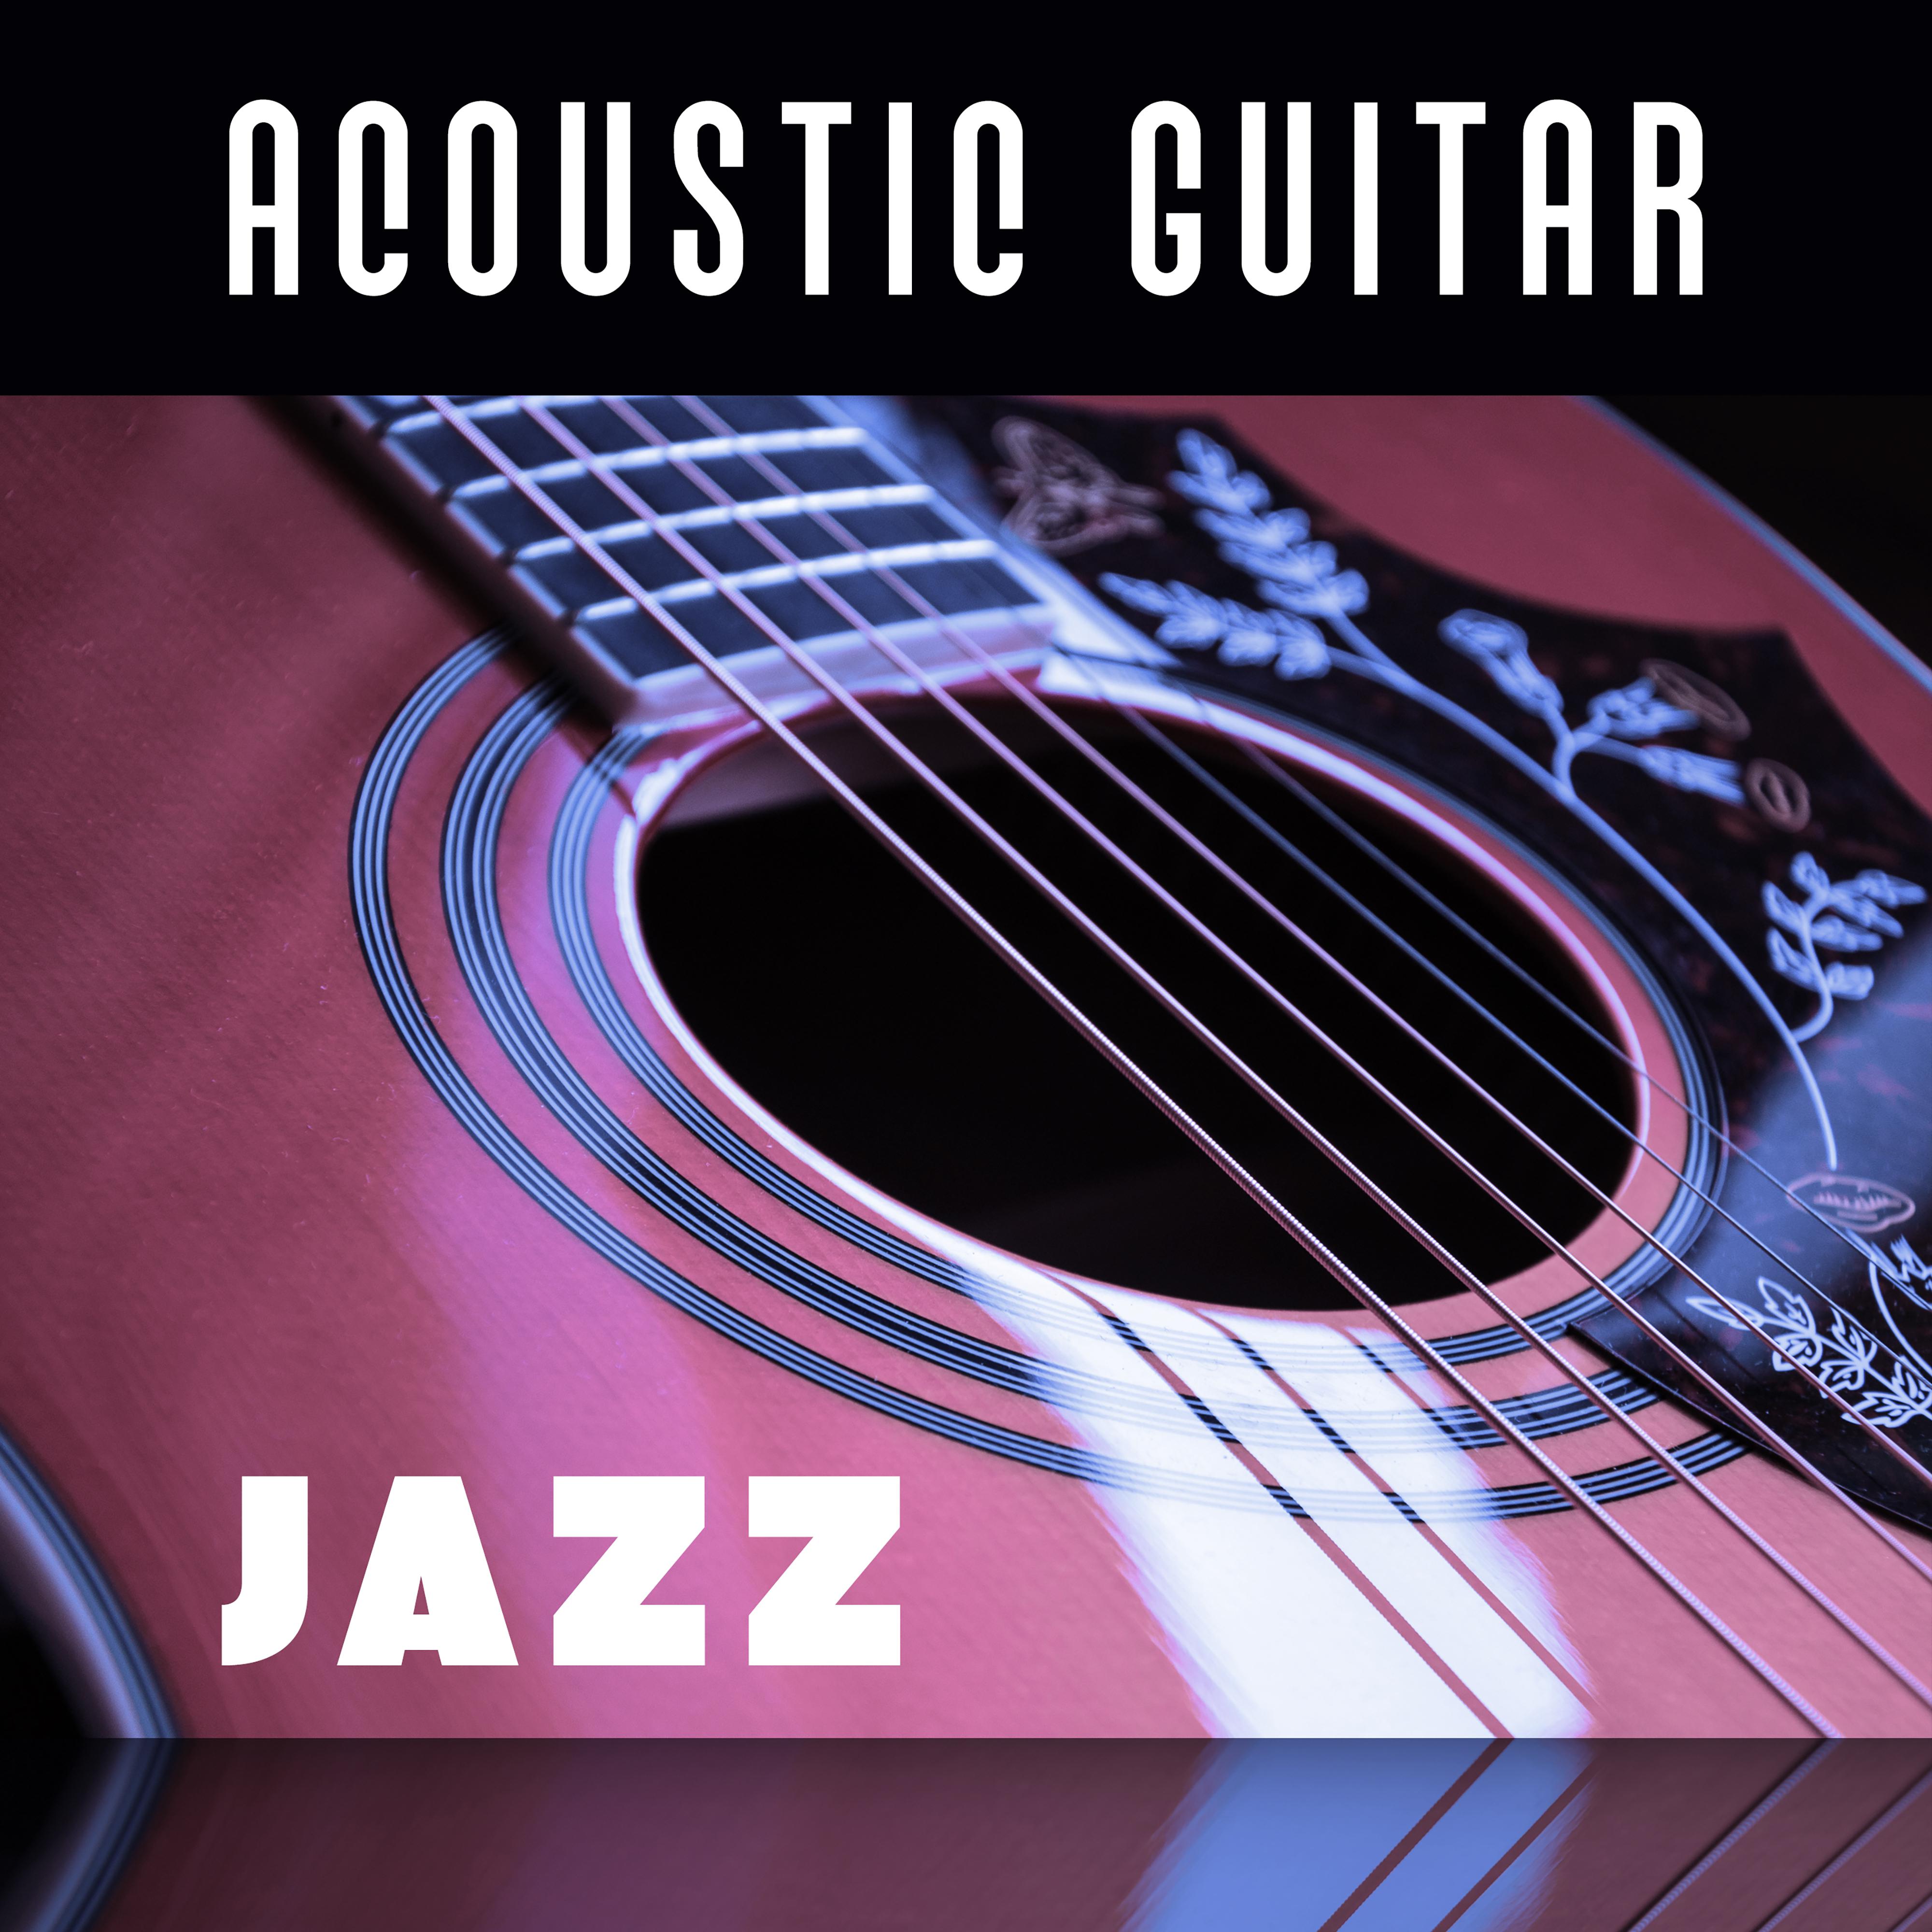 Acoustic Guitar Jazz  Instrumental Jazz, Relaxing Guitar  Piano, Smooth Jazz Music, Best Background for Cafe, Restaurant